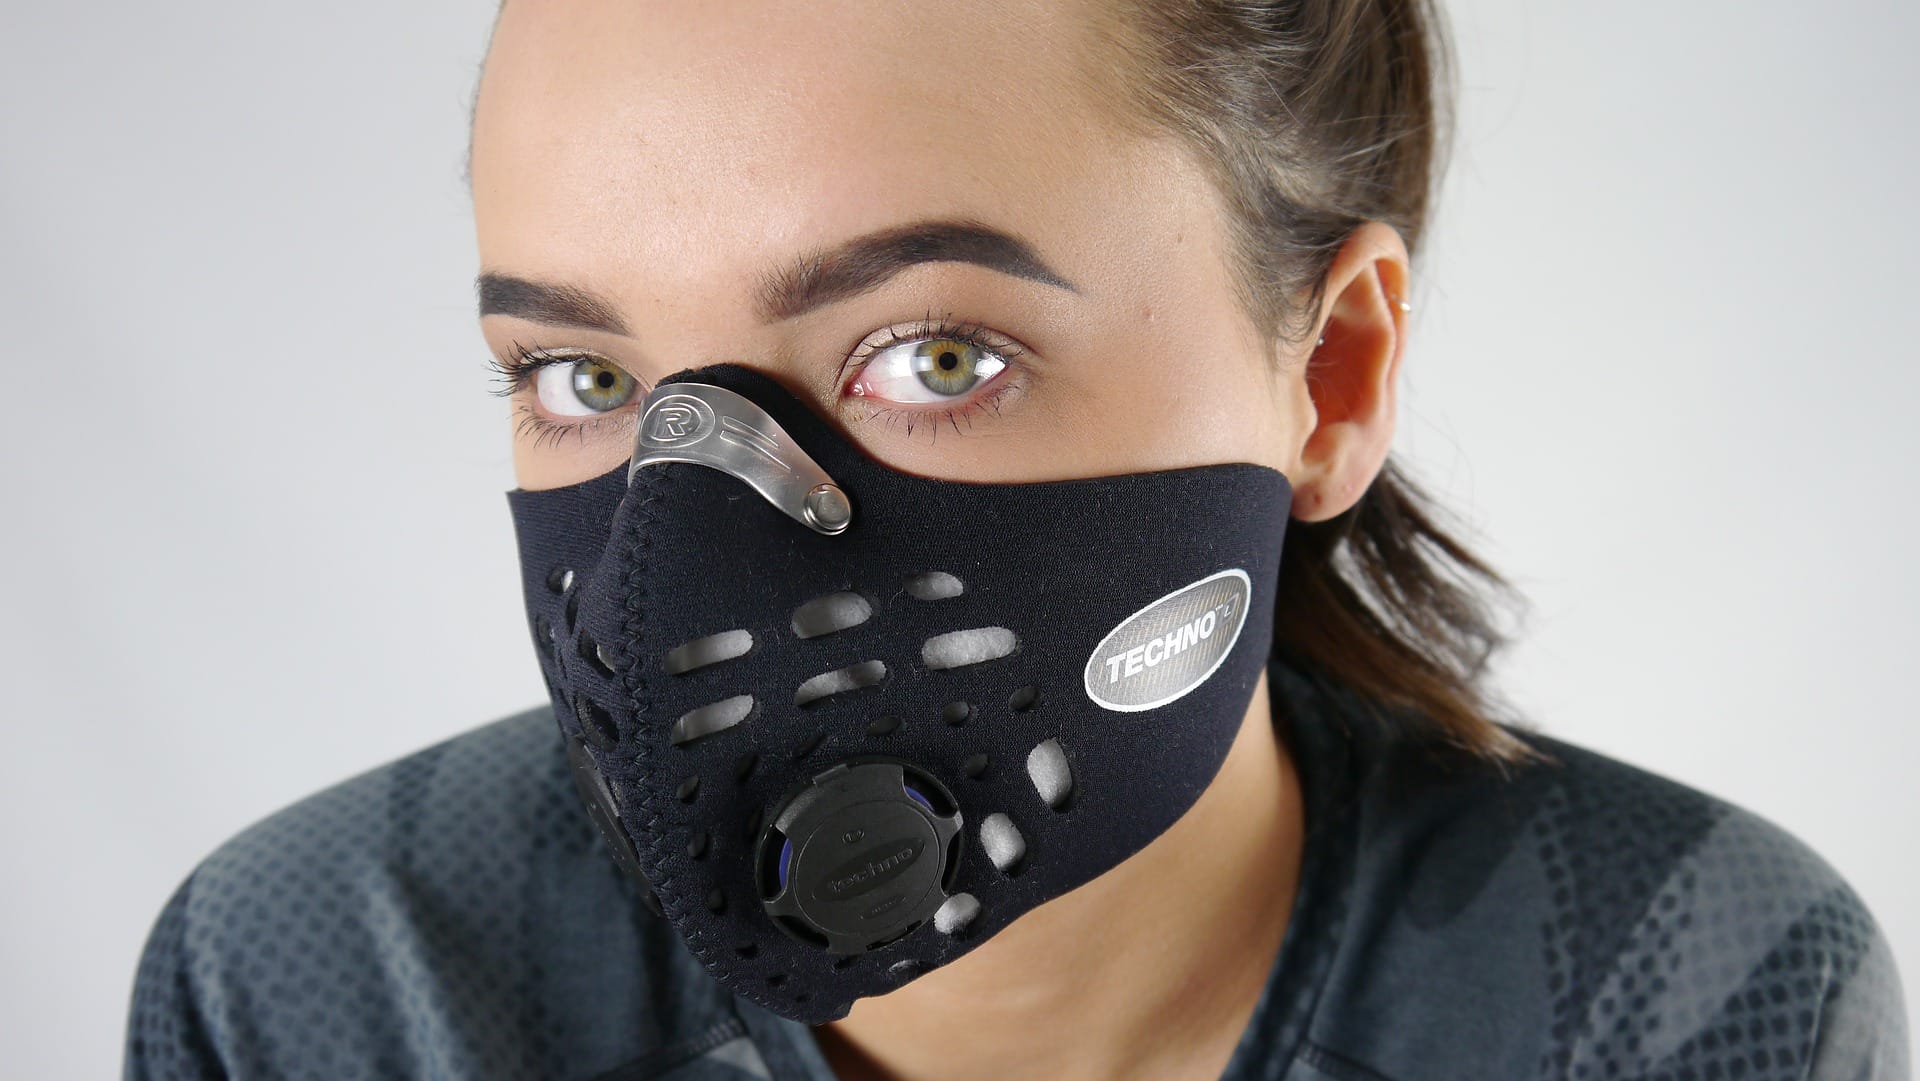 Sports Mask with KN95 Filter and Exhalation Valves - Ready First